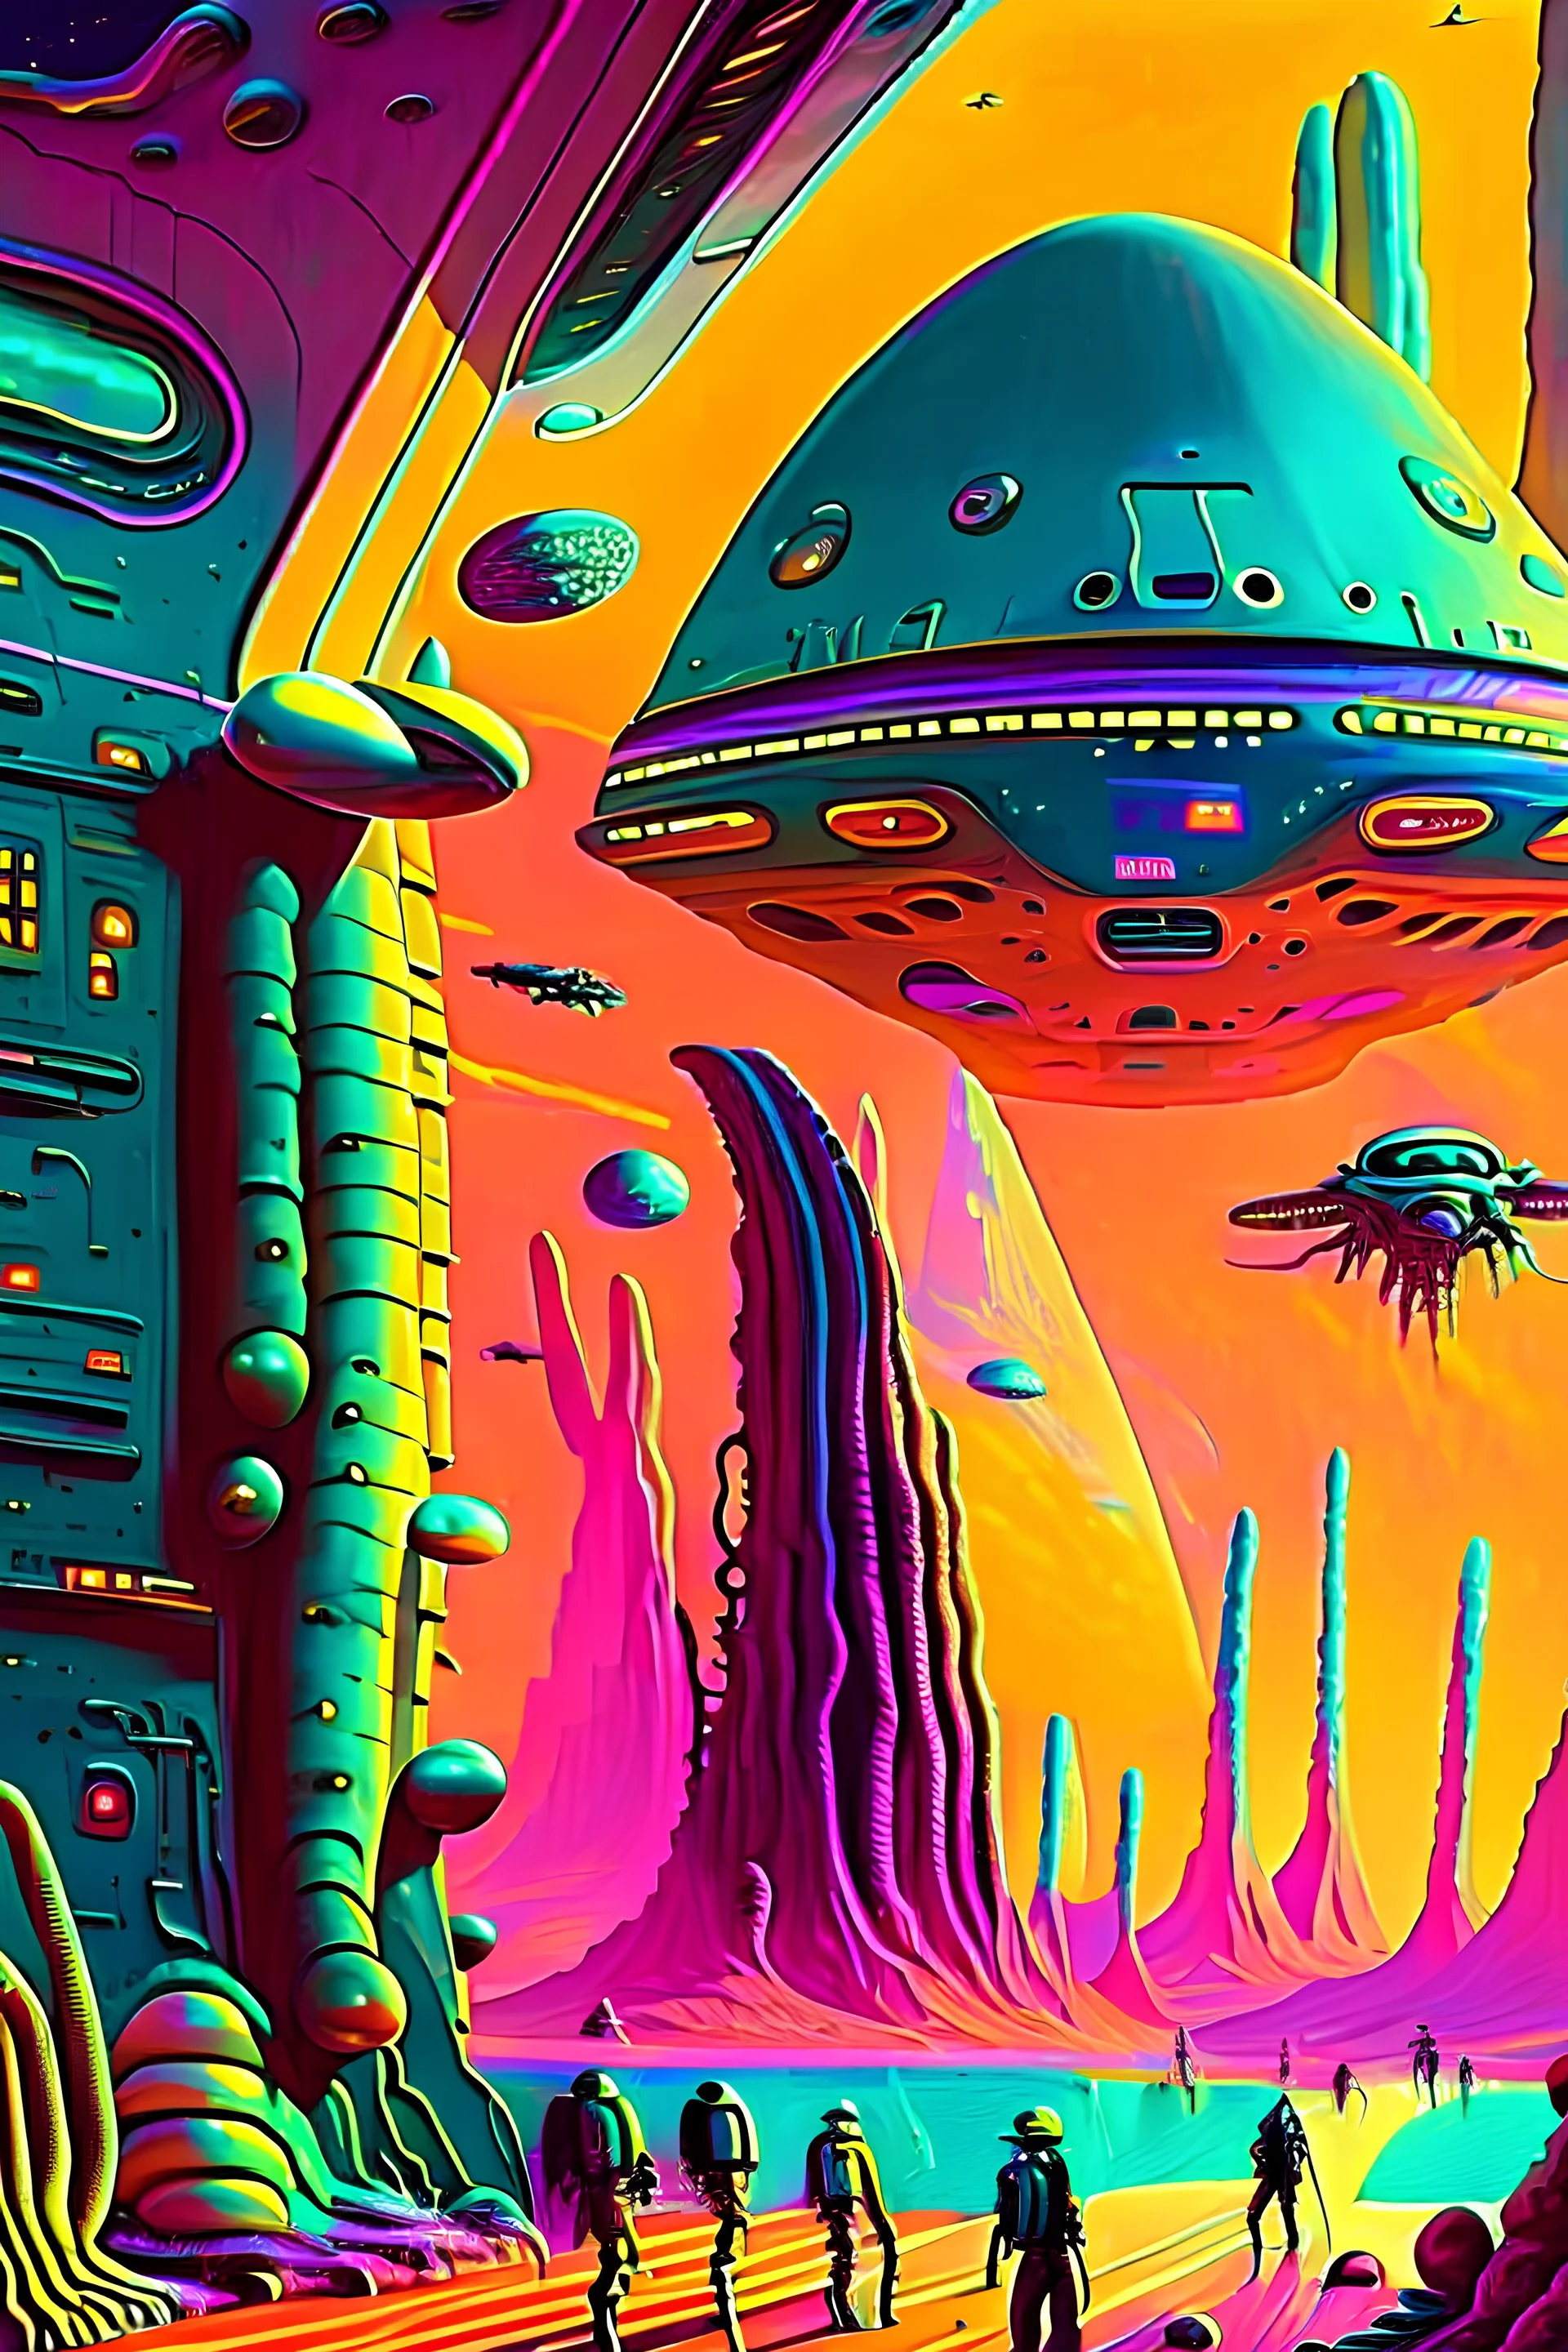 a close view of A visit to an alien world, explorers disembarking for the first time being greeted by aliens, kelly freas, in the style of retro futurism, Simon Stålenhag and Bob Eggleton, insanely detailed, terrifying: abstract art complementary colors fine details,